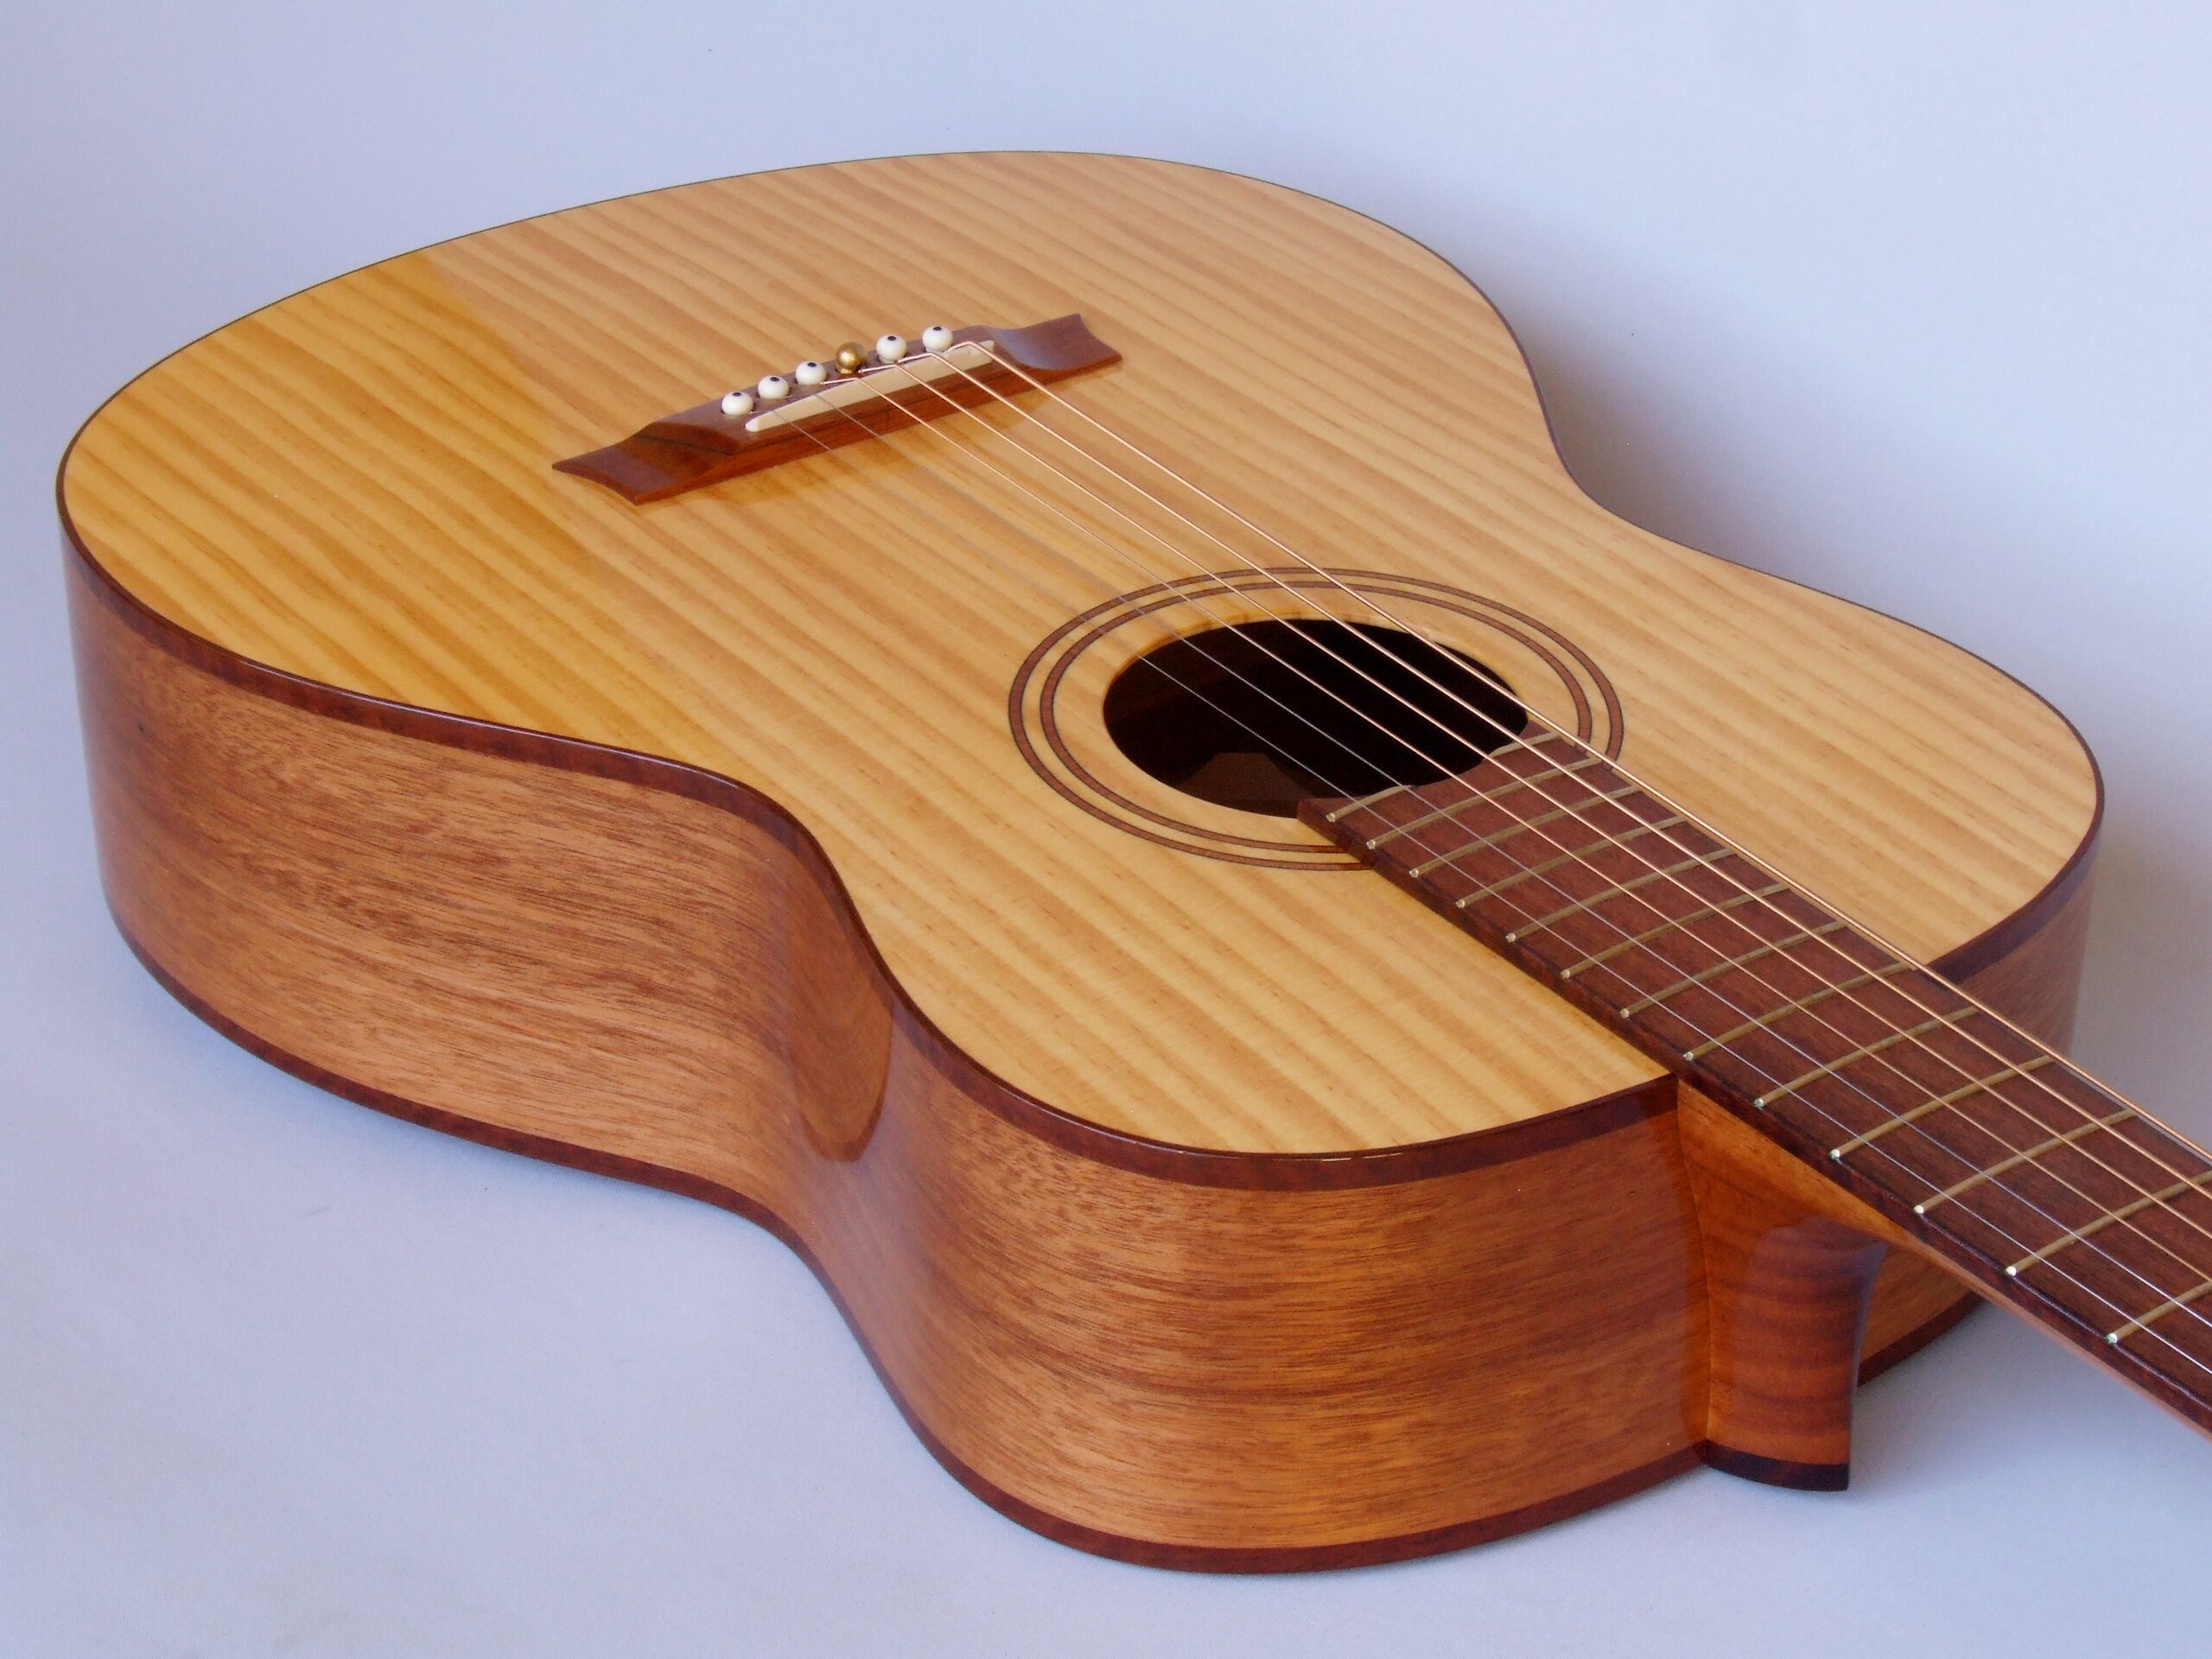 The Shed guitar with radiata pine top